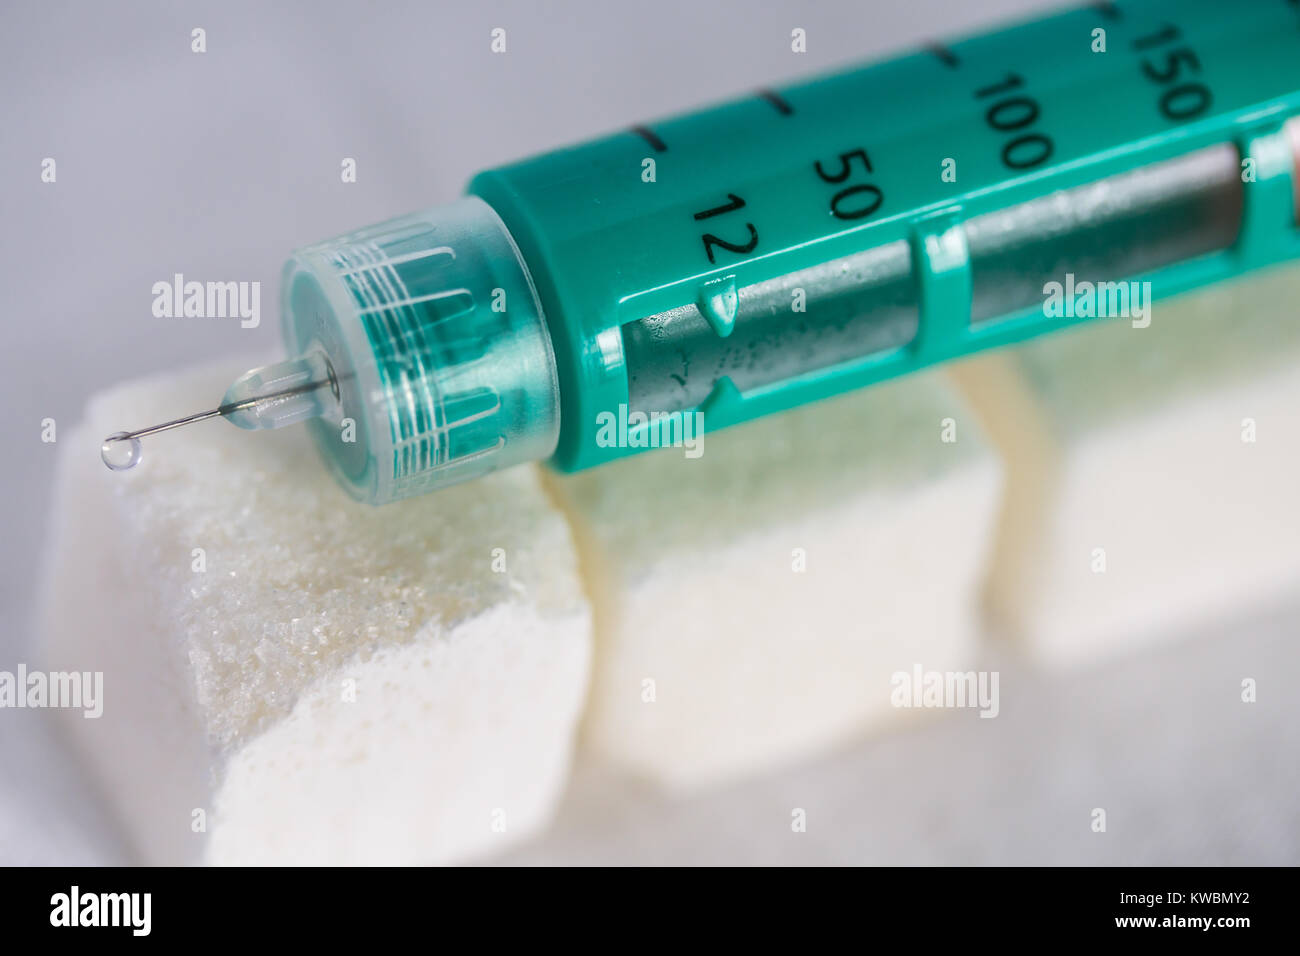 Concept image of Diabetes issues with Diabetic Insulin pen on top of Sugar lumps Stock Photo